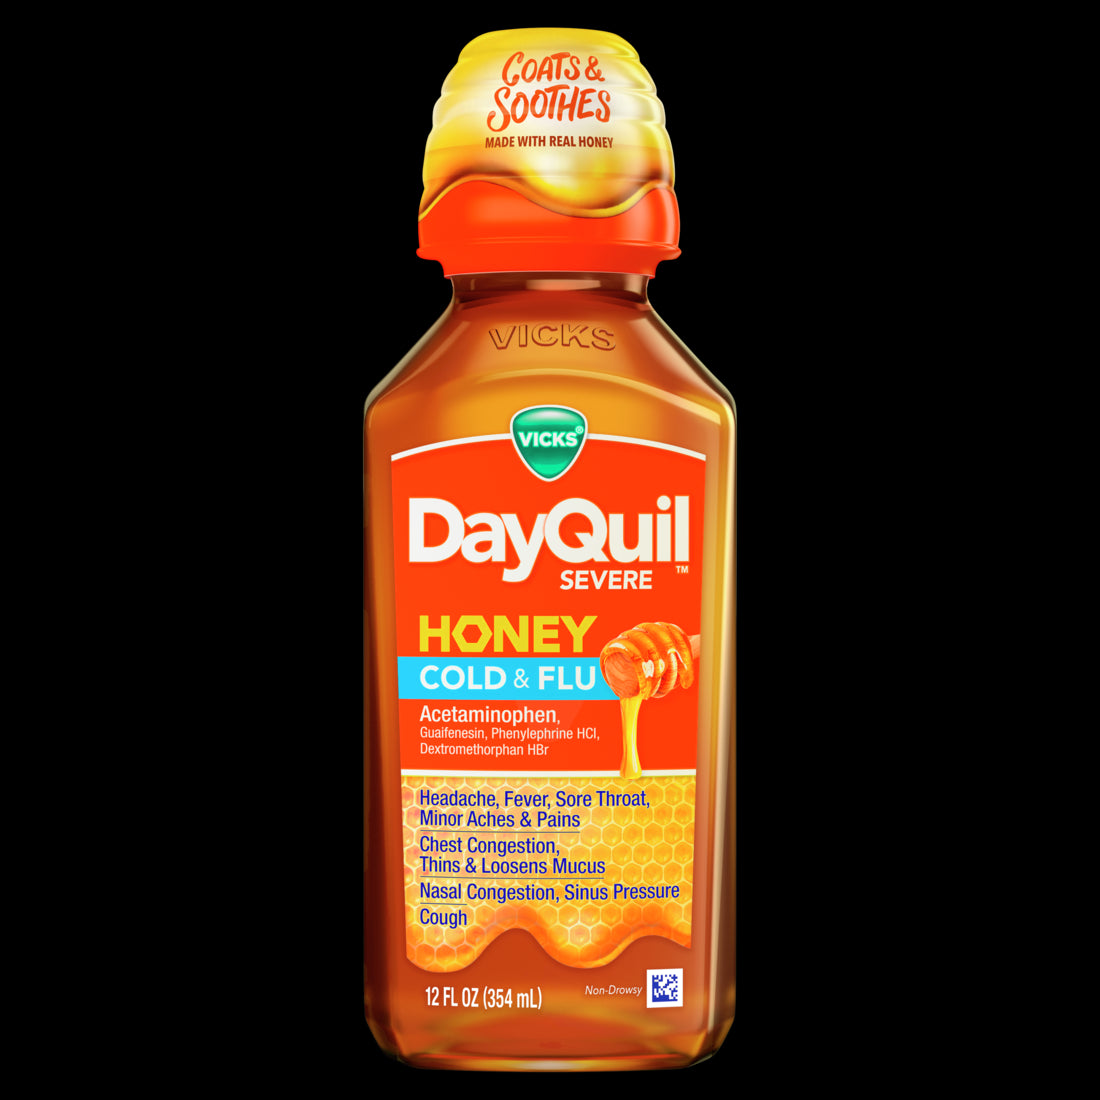 Vicks DayQuil Severe Honey Cold & Flu Liquid Max Strength Daytime Relief - 12oz/12pk